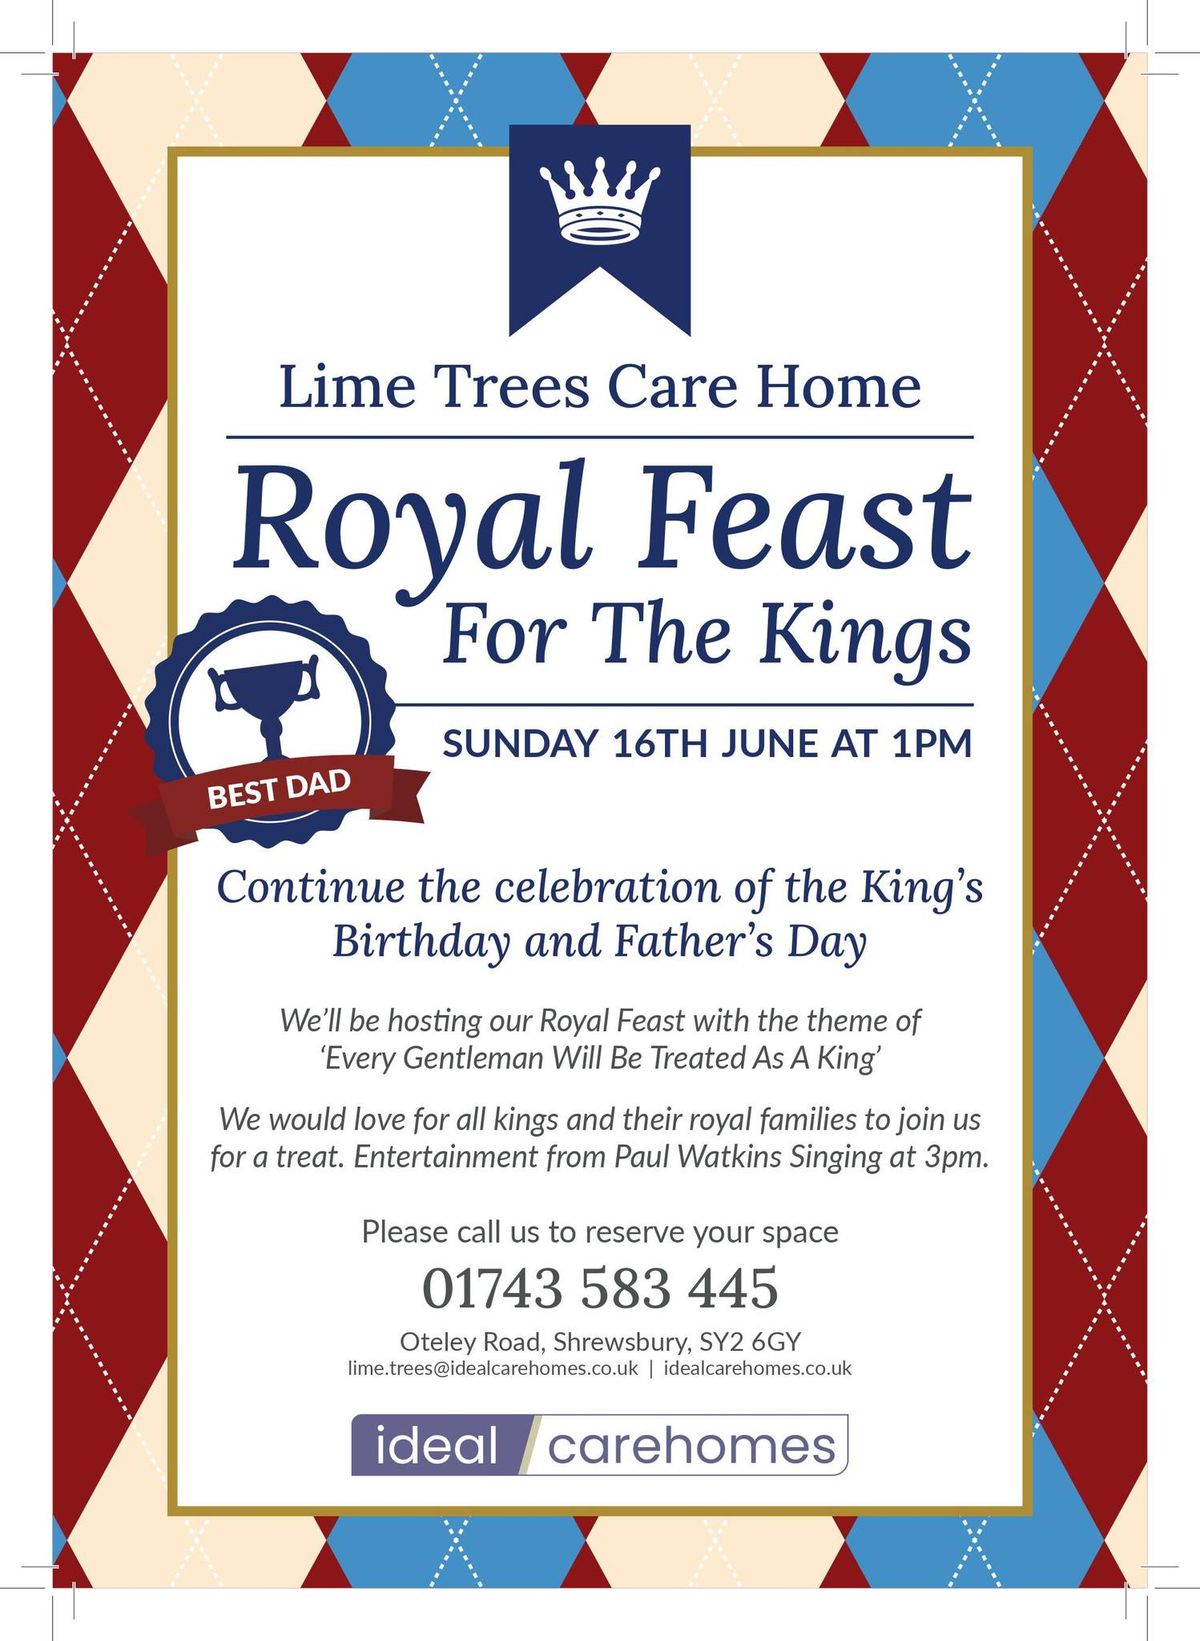 Royal Feast for the Kings - Community Lunch for Father's Day